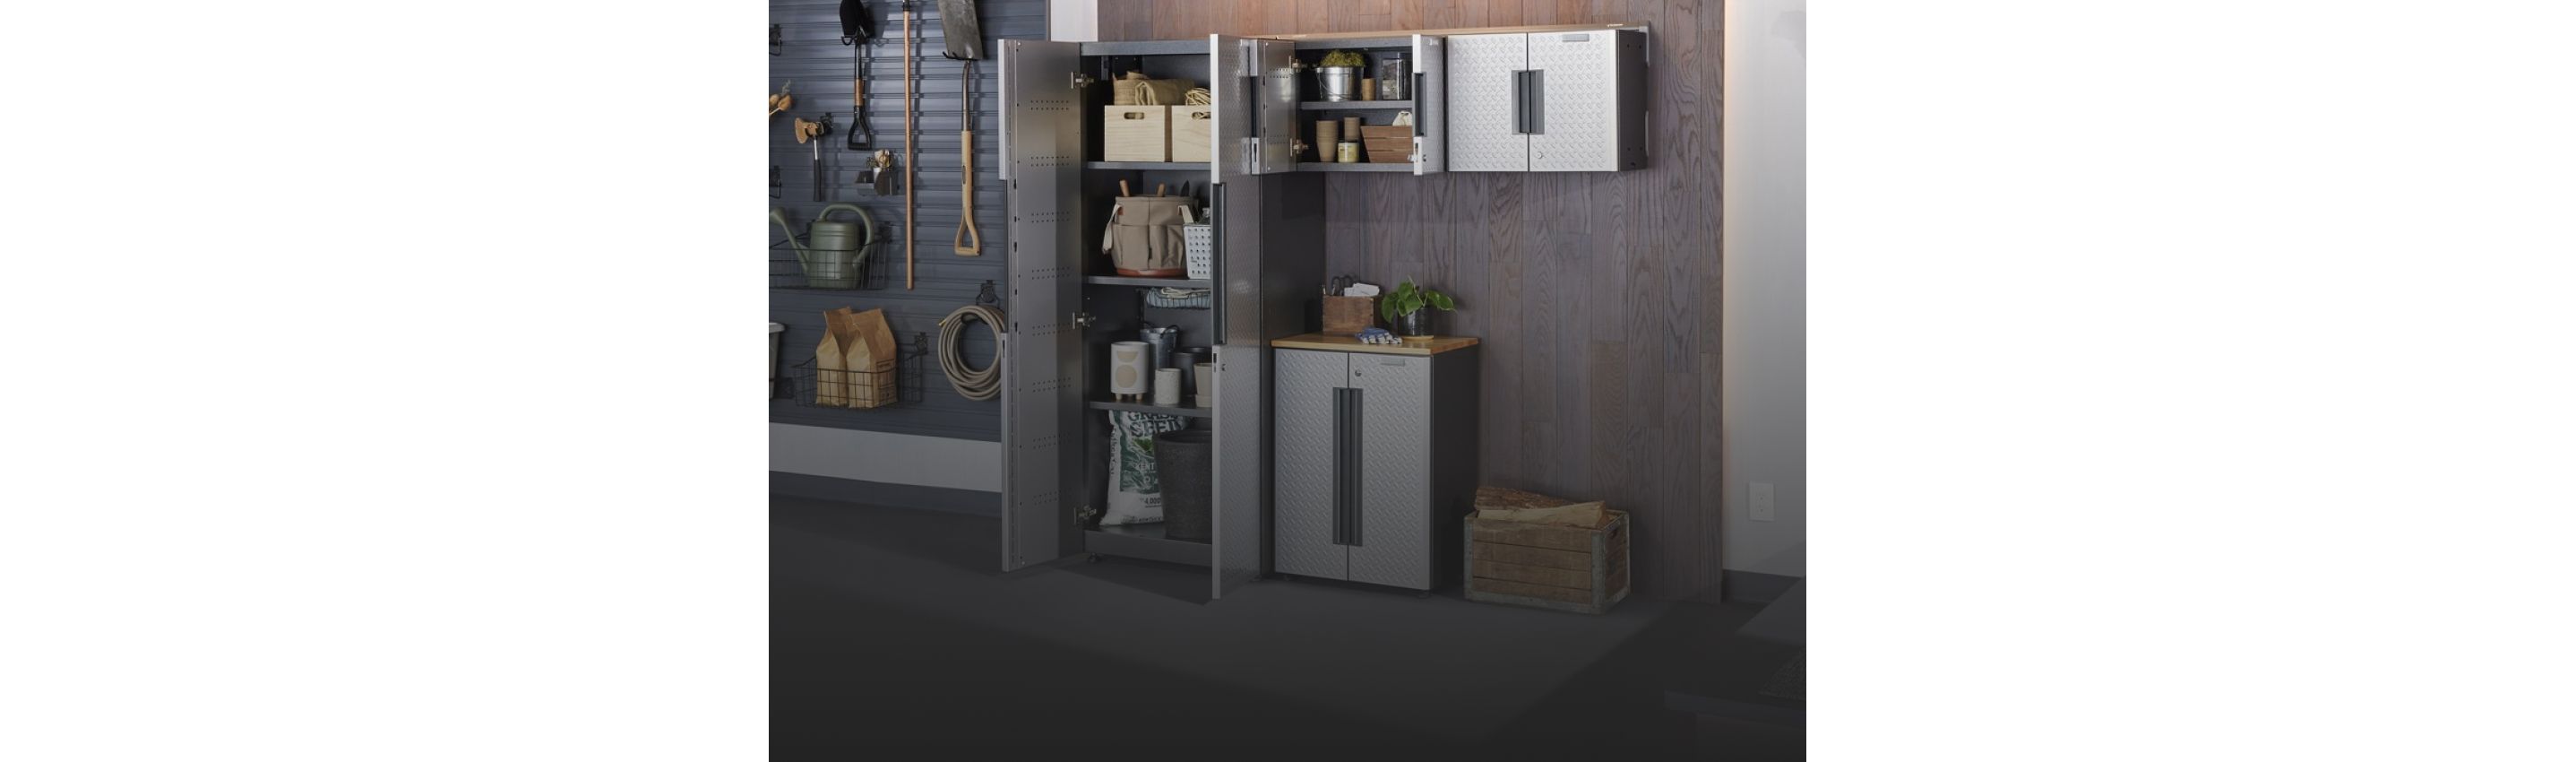 A garage with a Gladiator Flex Cabinet System. The vertical cabinet doors are opened revealing a toolbox, baskets, paint cans, a bag of soil and other various items. One of the top cabinets is also opened and on the shelves are baskets, a metal container and more